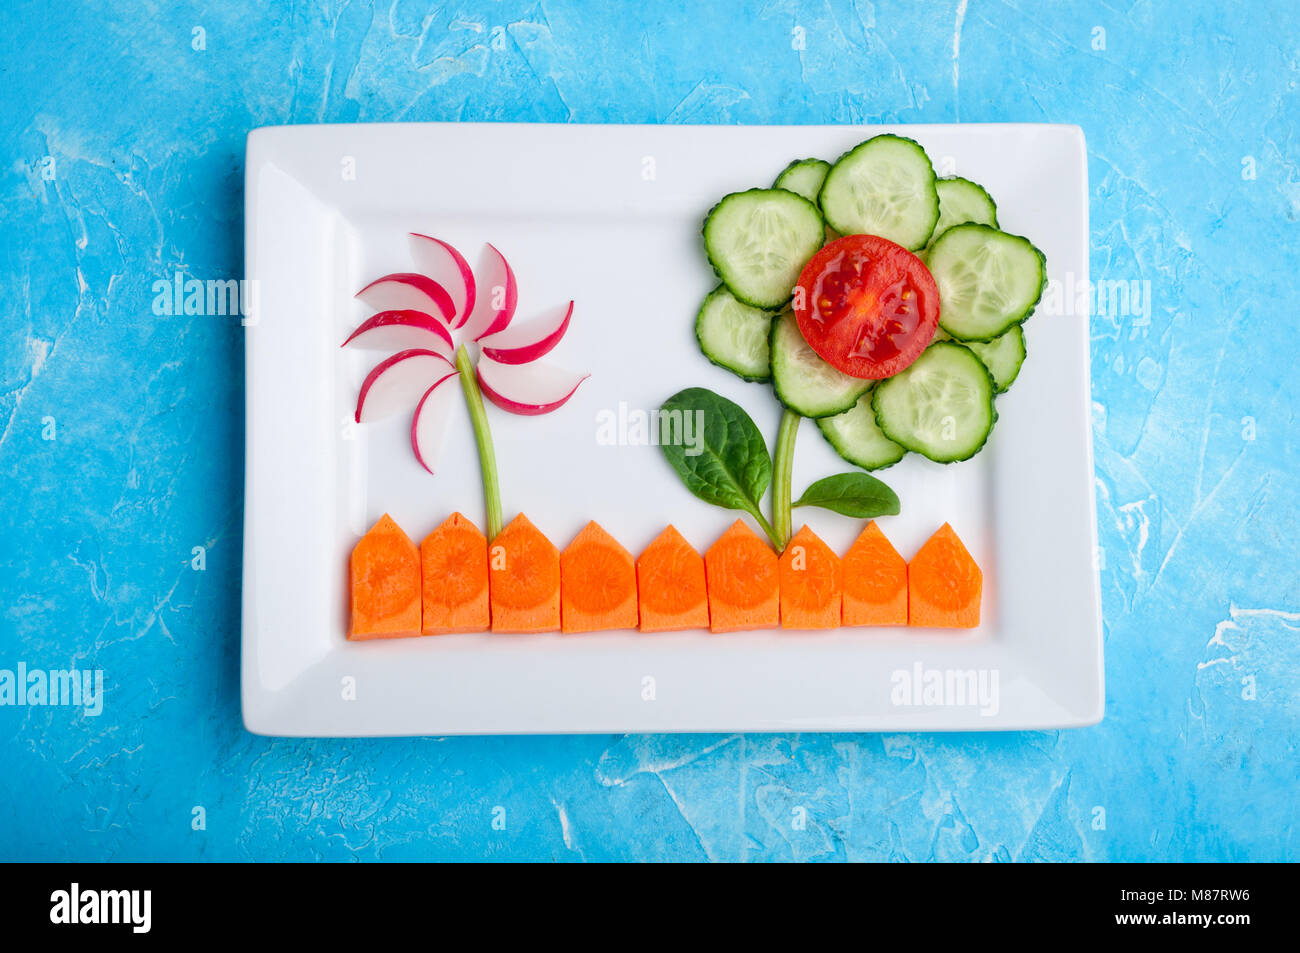 Kids food. Funny vegetable salad for kids. Healthy food with vegetables tomato, cucumber, carrot, radish, spinach and sour cream. Baby snack. Top view Stock Photo